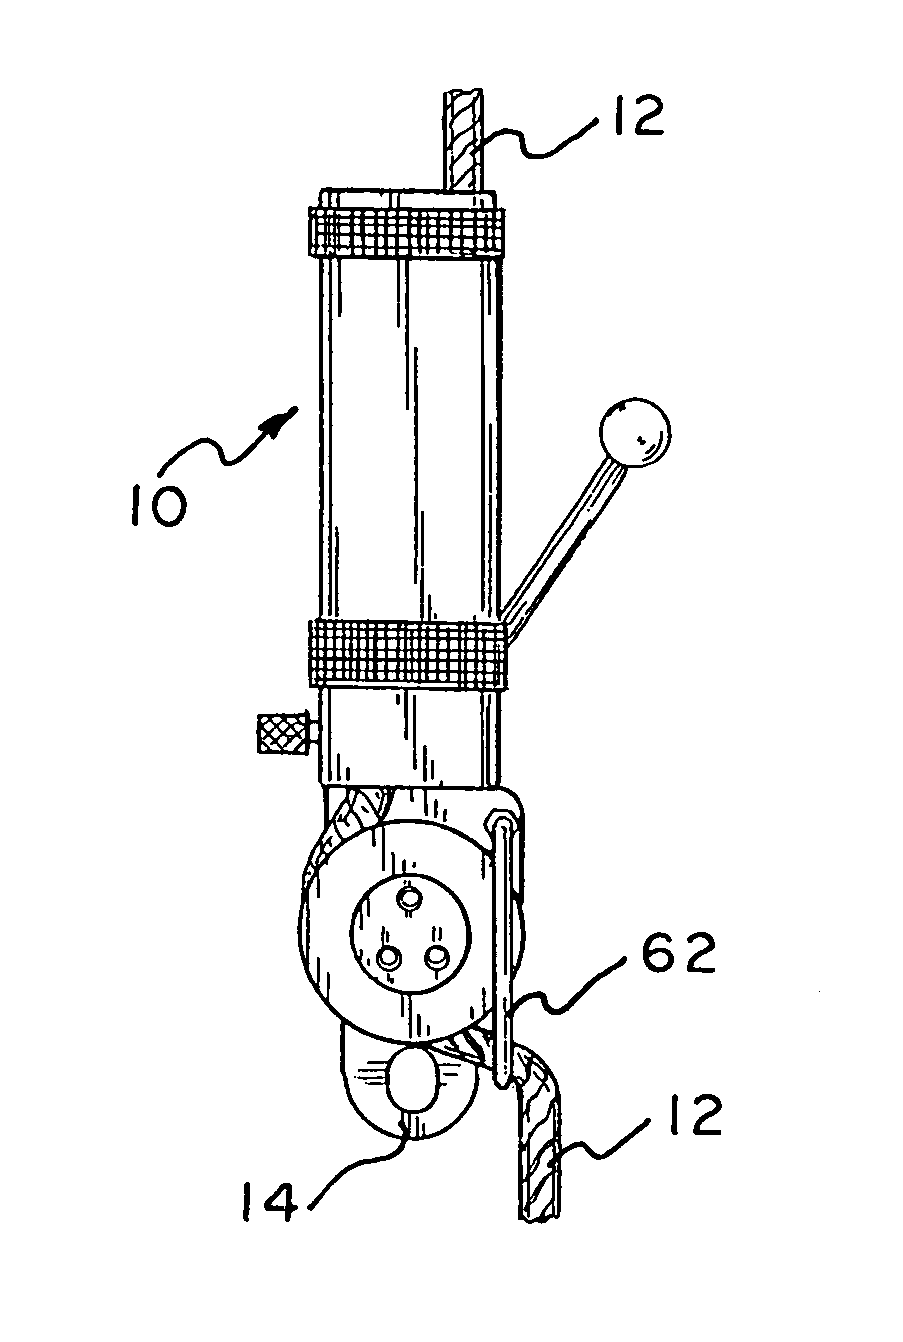 Descent controller with safety brake